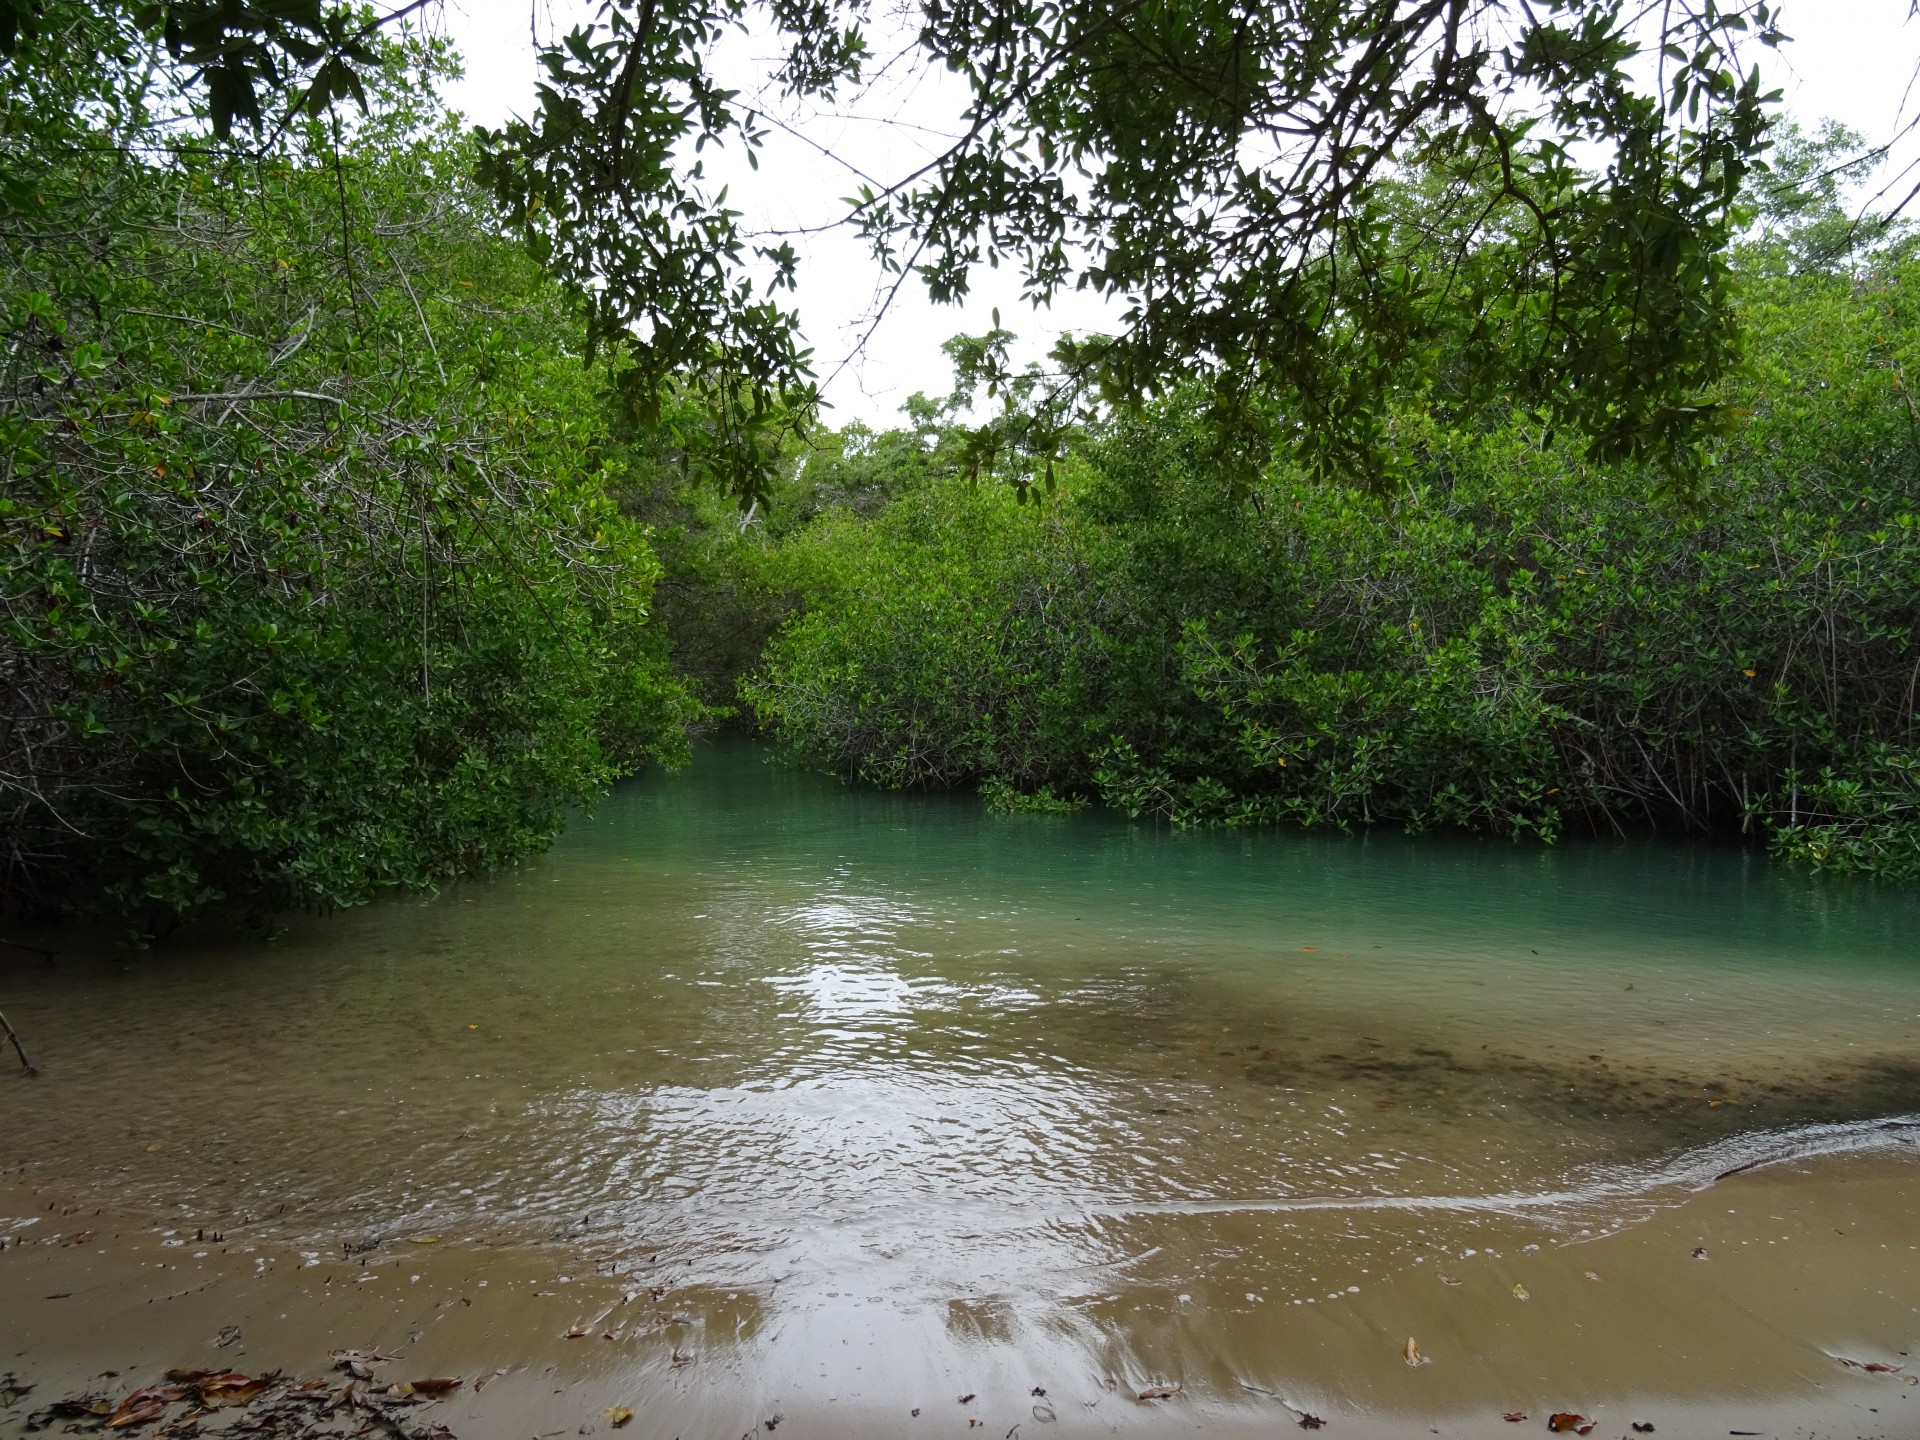 In the mangroves.